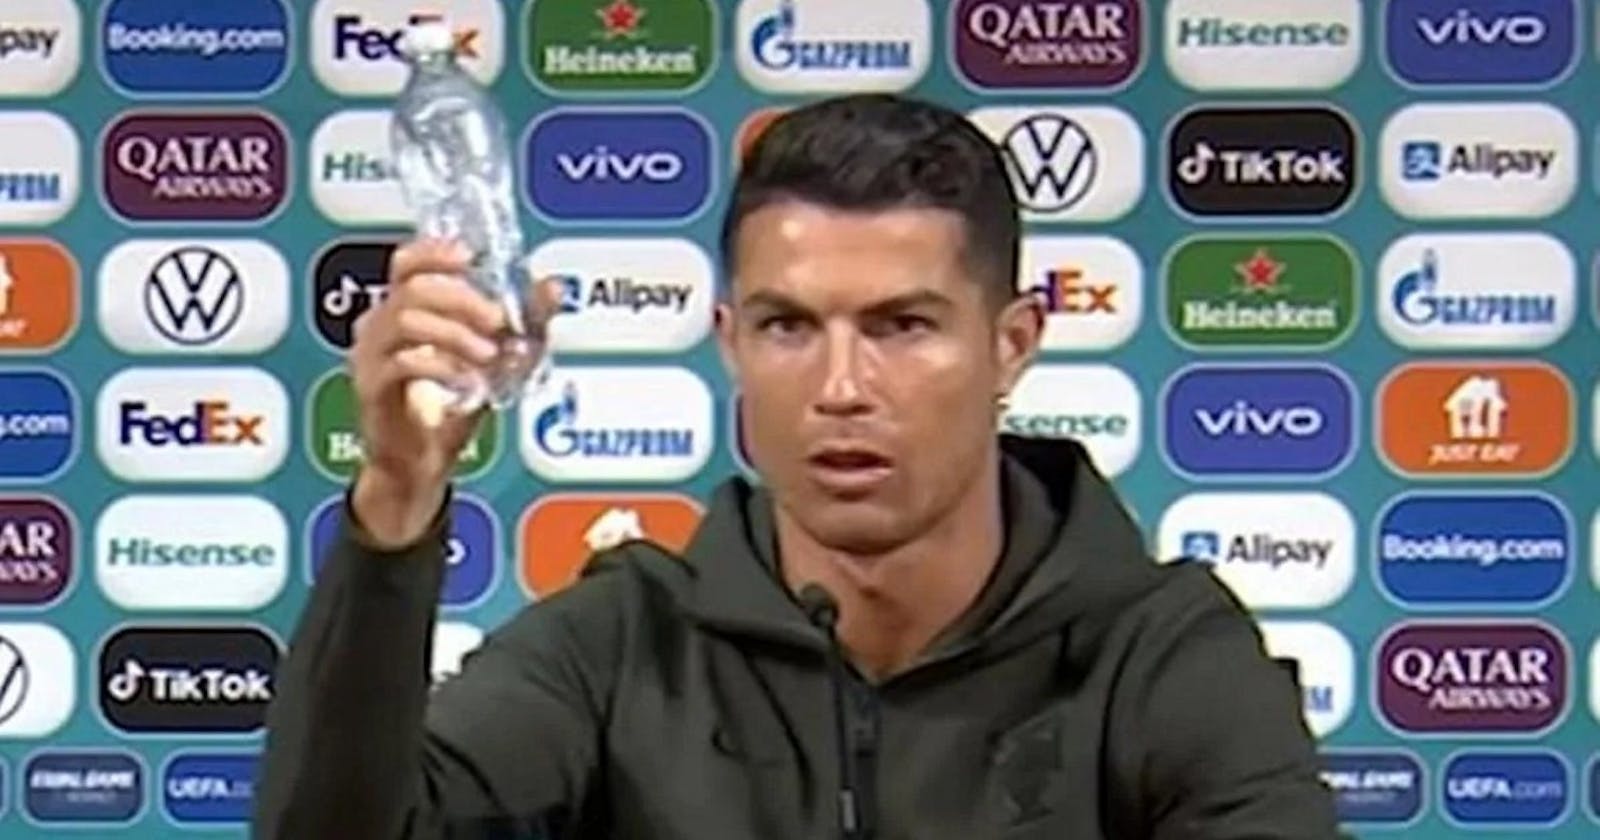 Stay Hydrated Chrome Extension (Cristiano Ronaldo Edition)